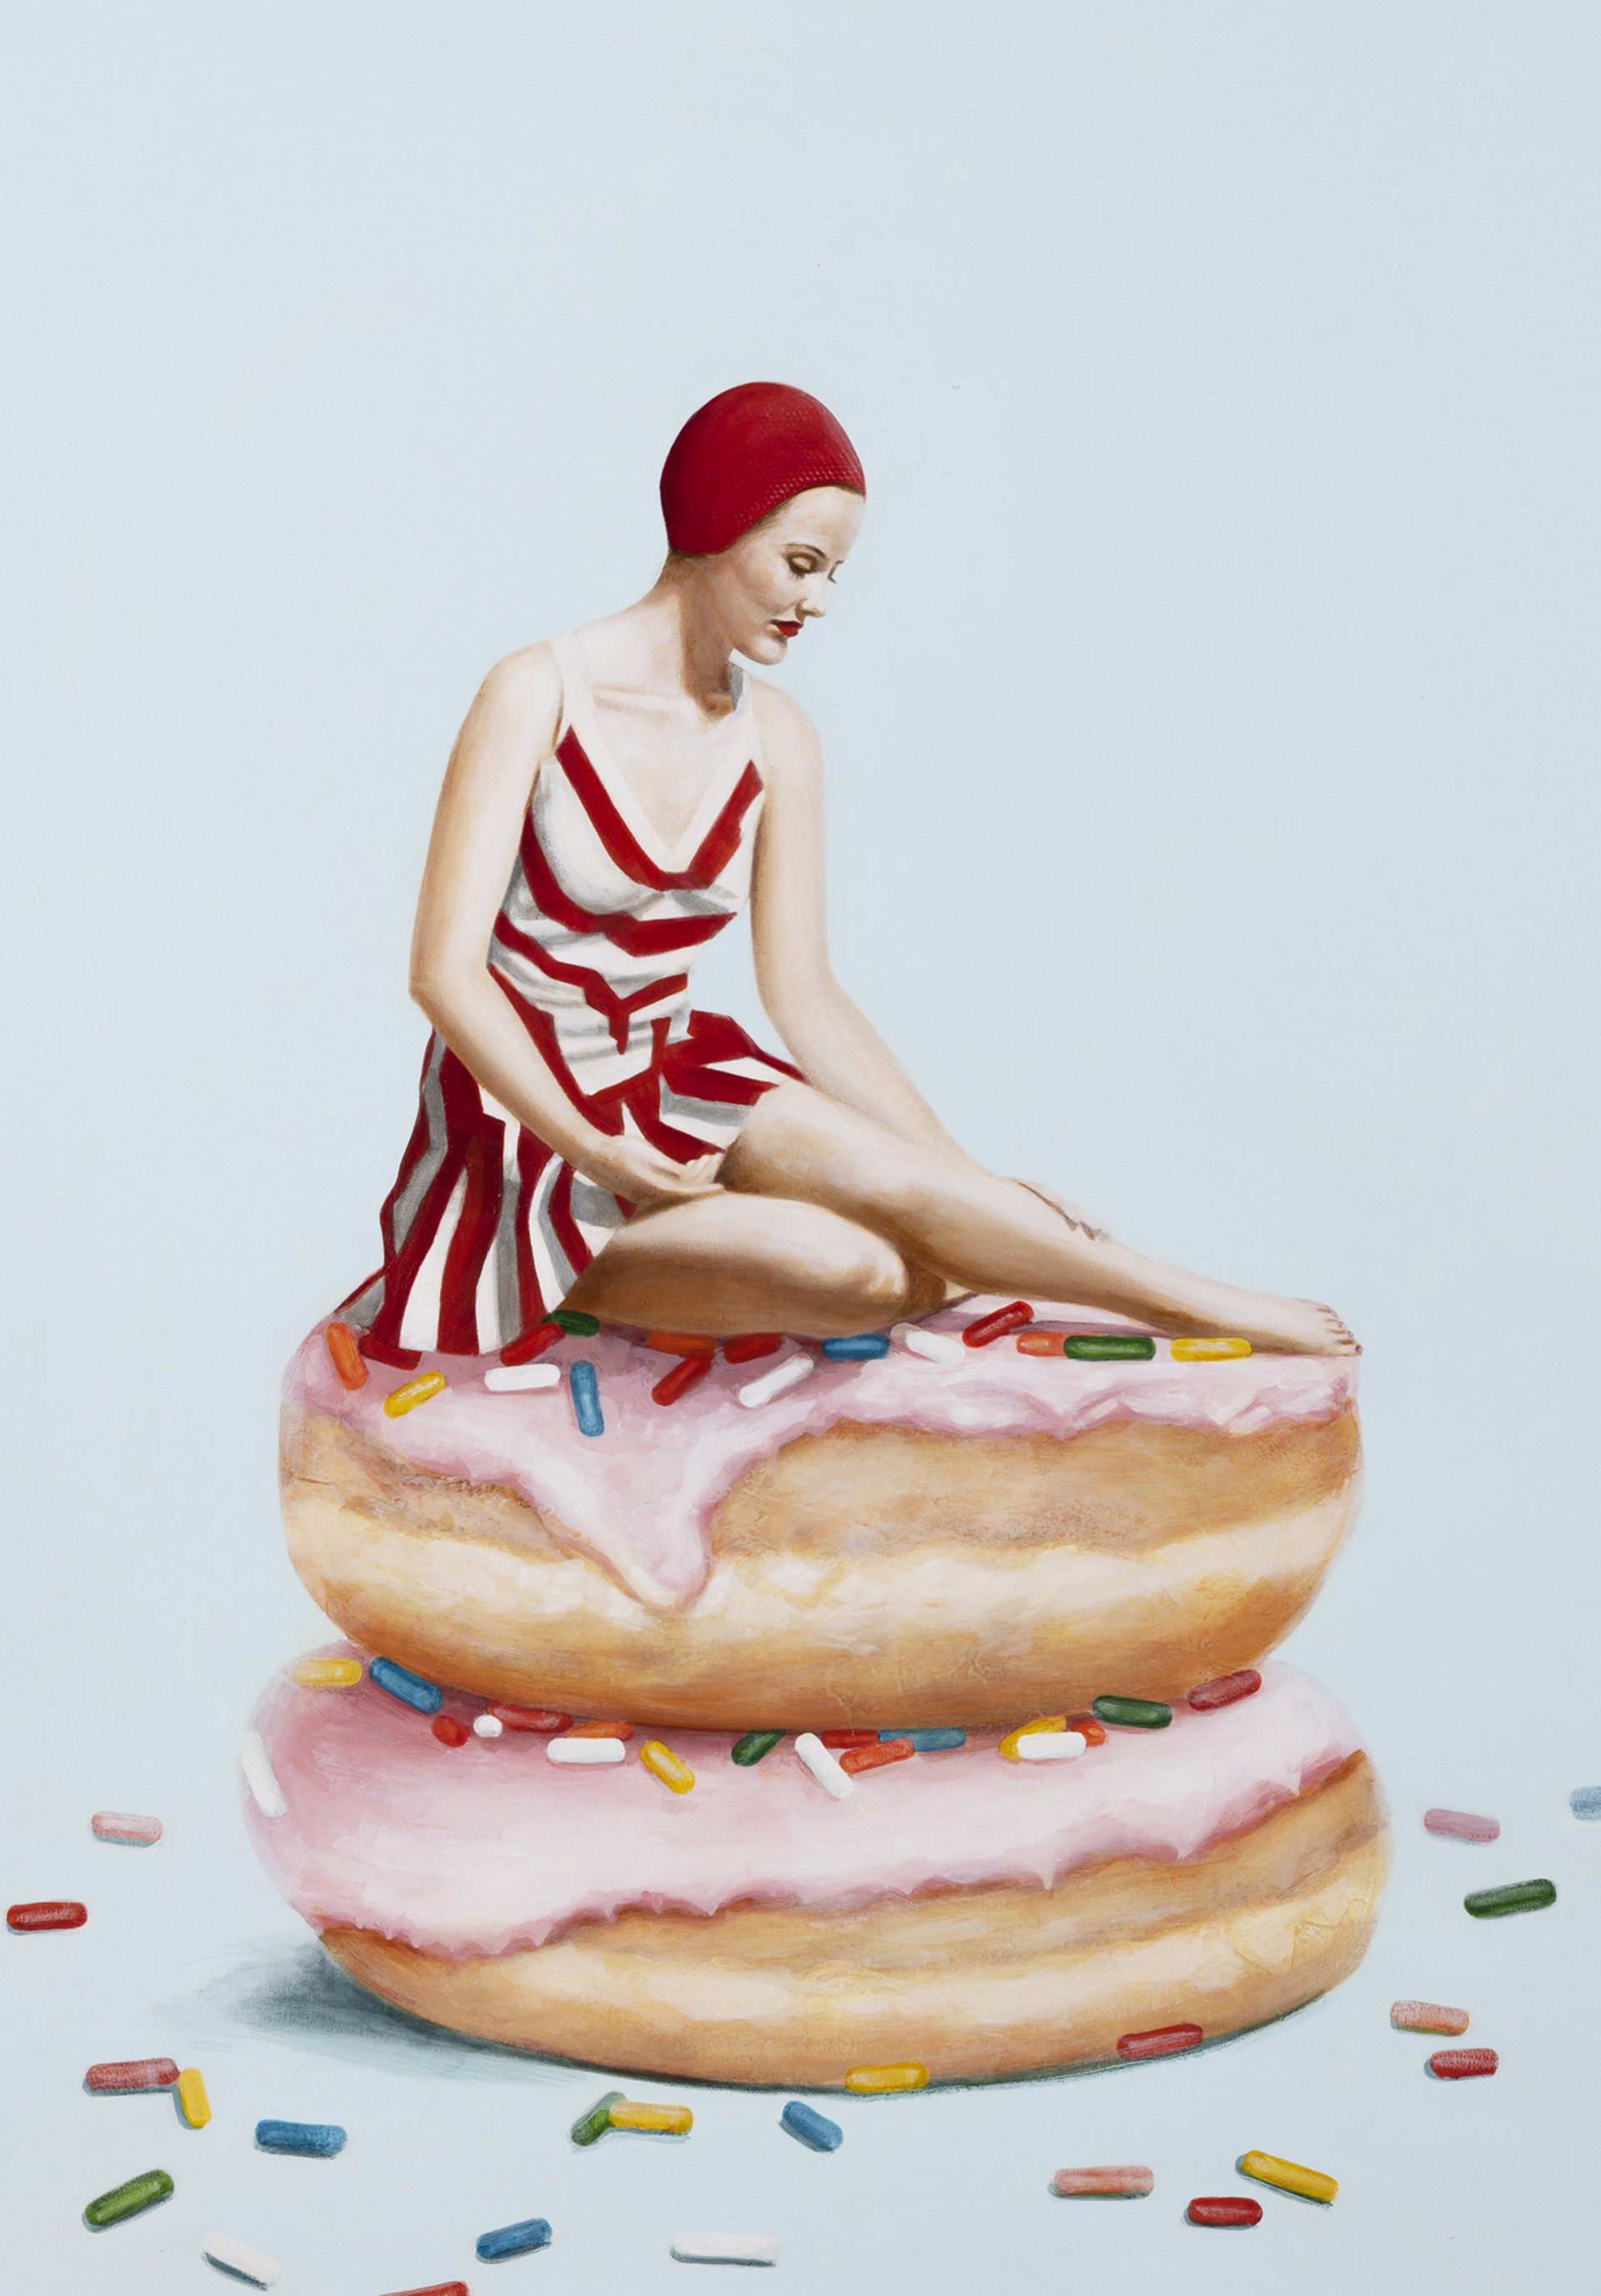 Donut Daydream by Elise Remender